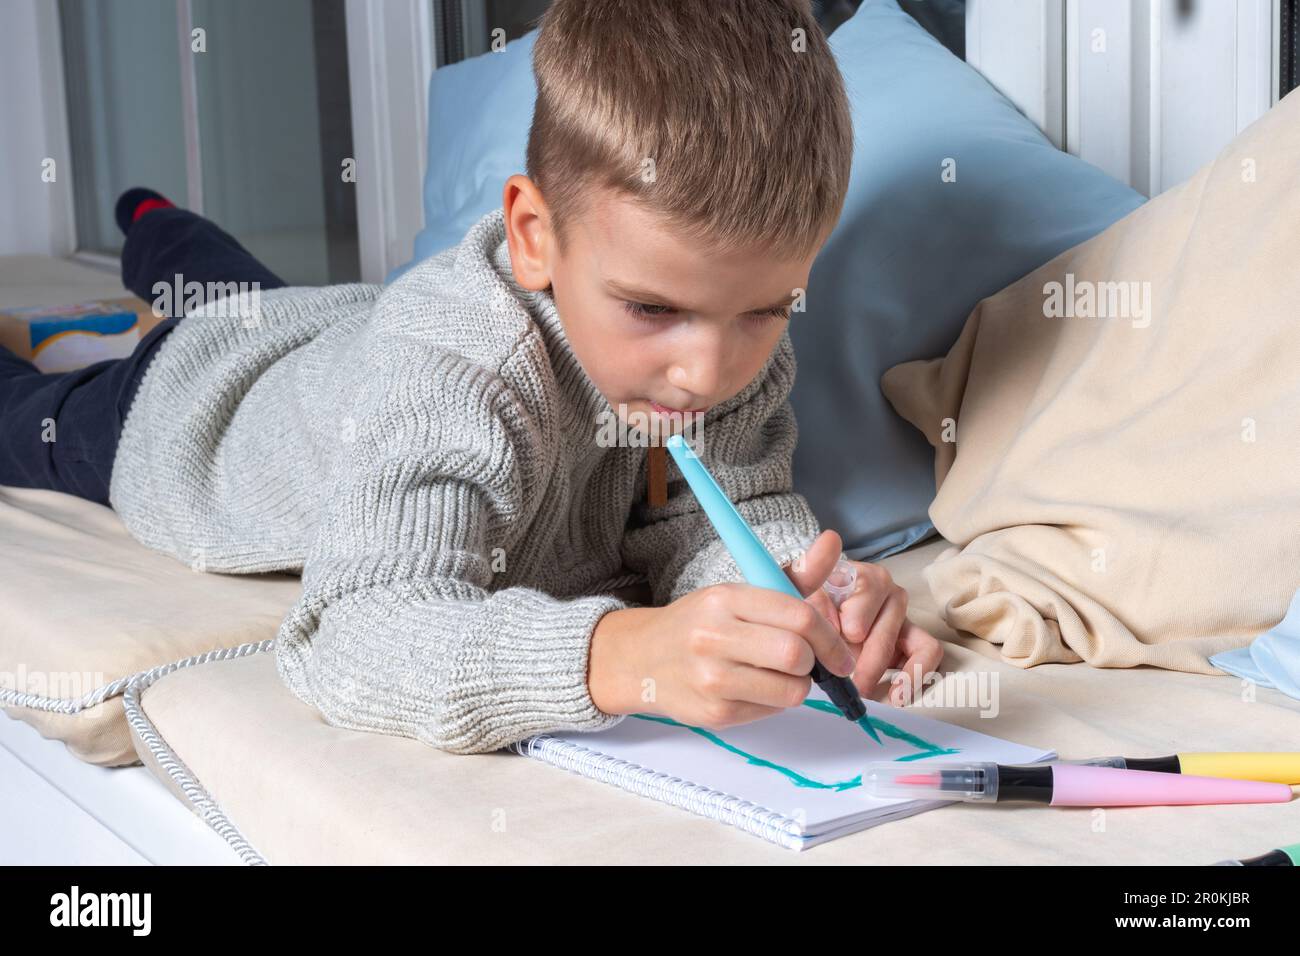 child draws on paper with felt-tip pens lying on the floor. Child doing school lesson at home. Child Education Concept, Kid Boy Drawing and Dreaming S Stock Photo